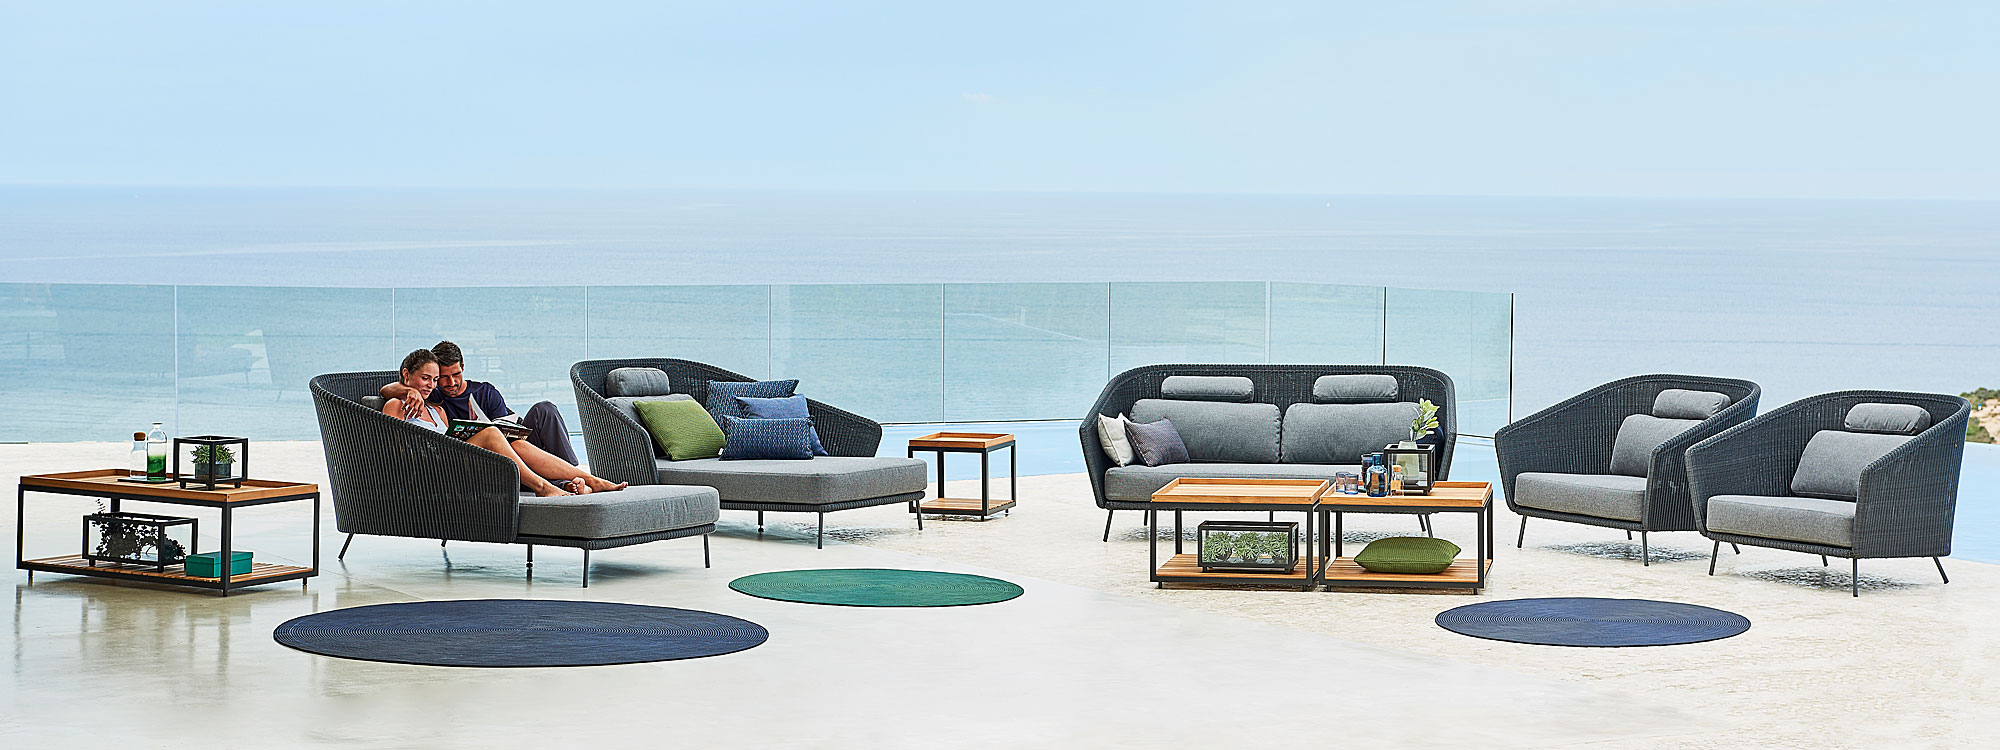 Image of Cane-line Mega outdoor lounge furniture and garden chaise longue in dark grey rattan with grey cushions